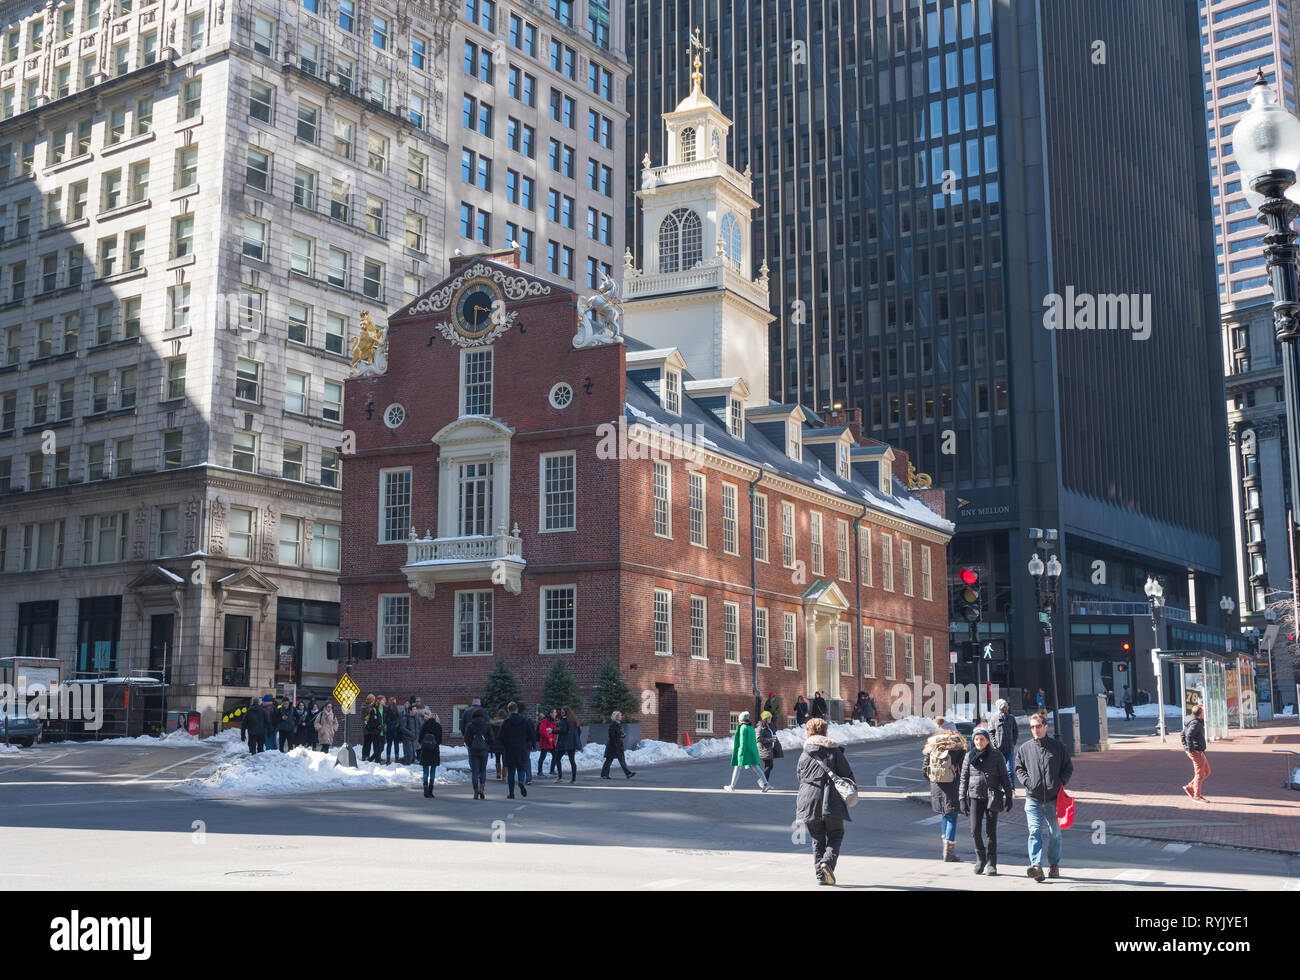 One International Place Buildings at Boston Massachusetts, Purchase Street  Editorial Stock Image - Image of international, building: 118978159